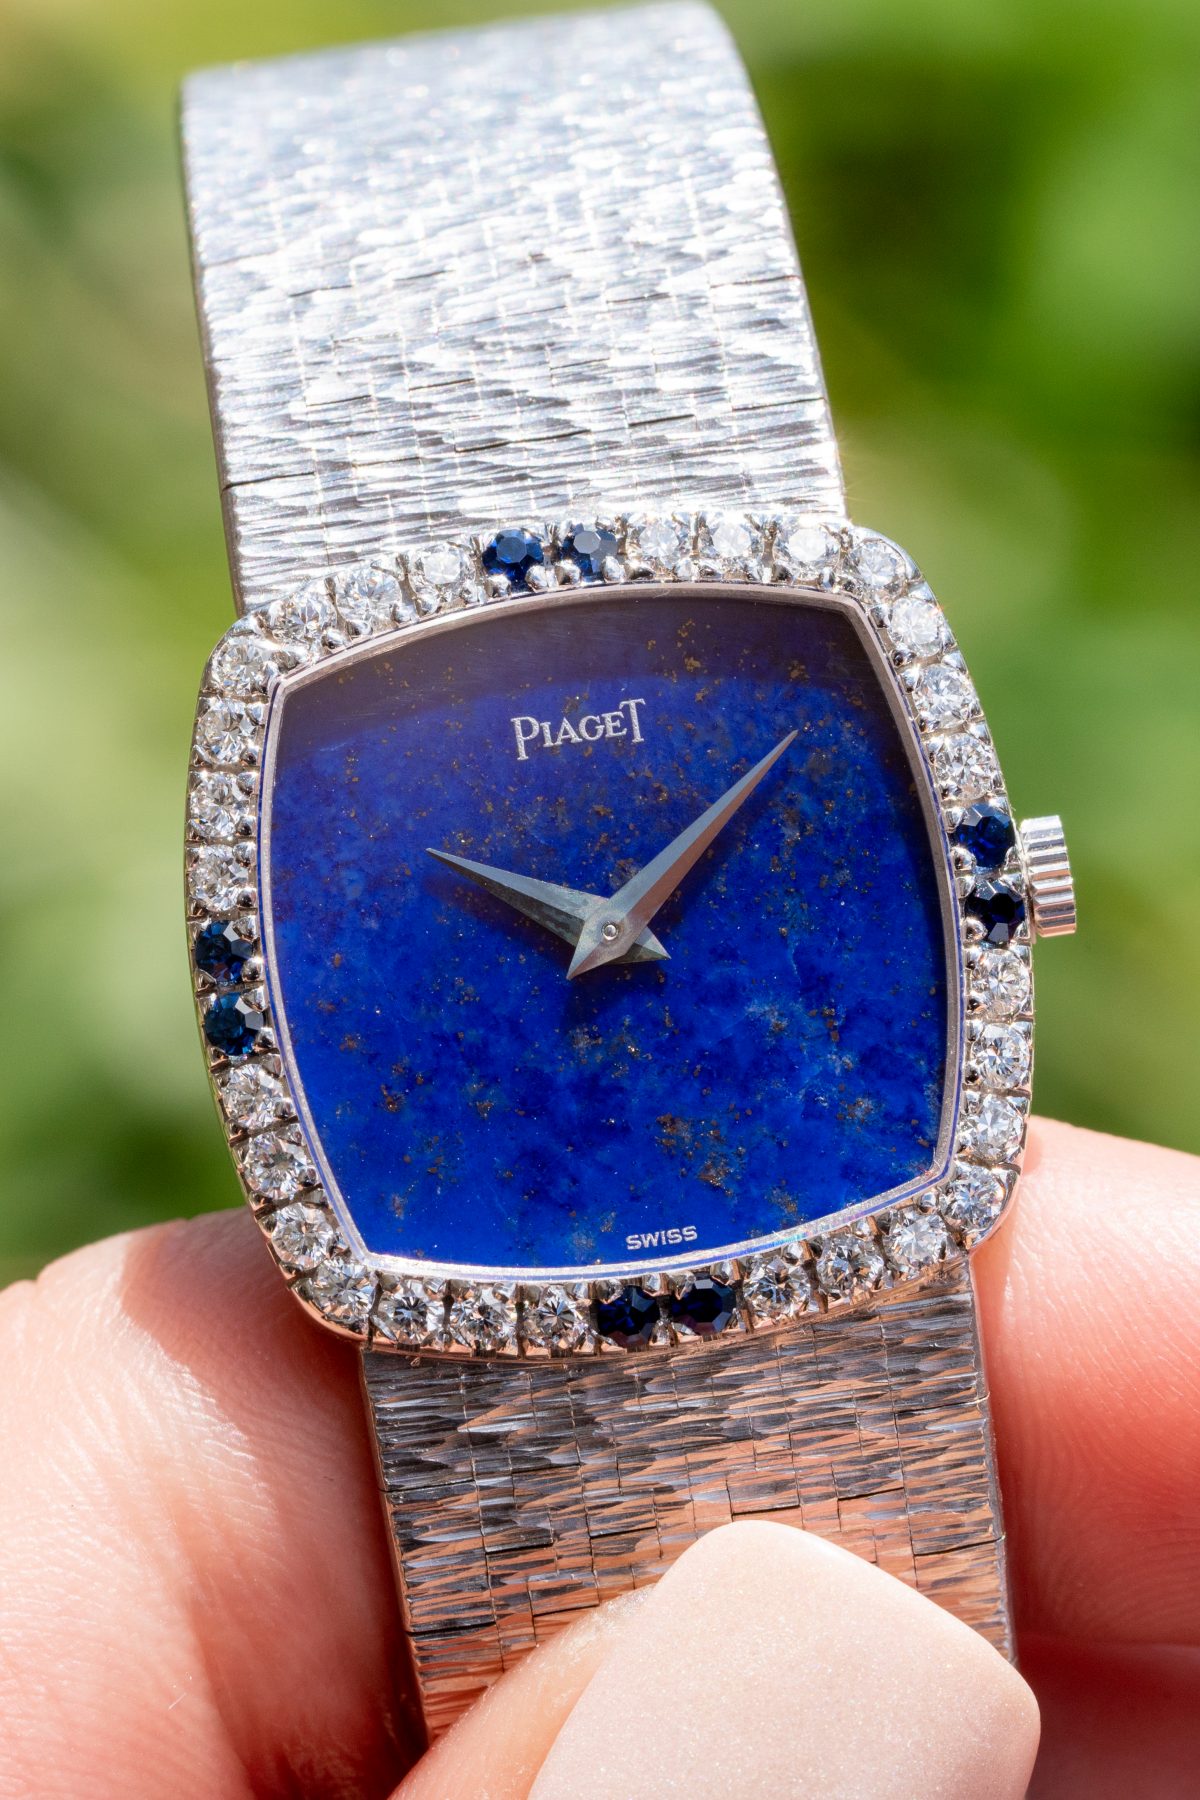 Piaget watches with exceptional designs